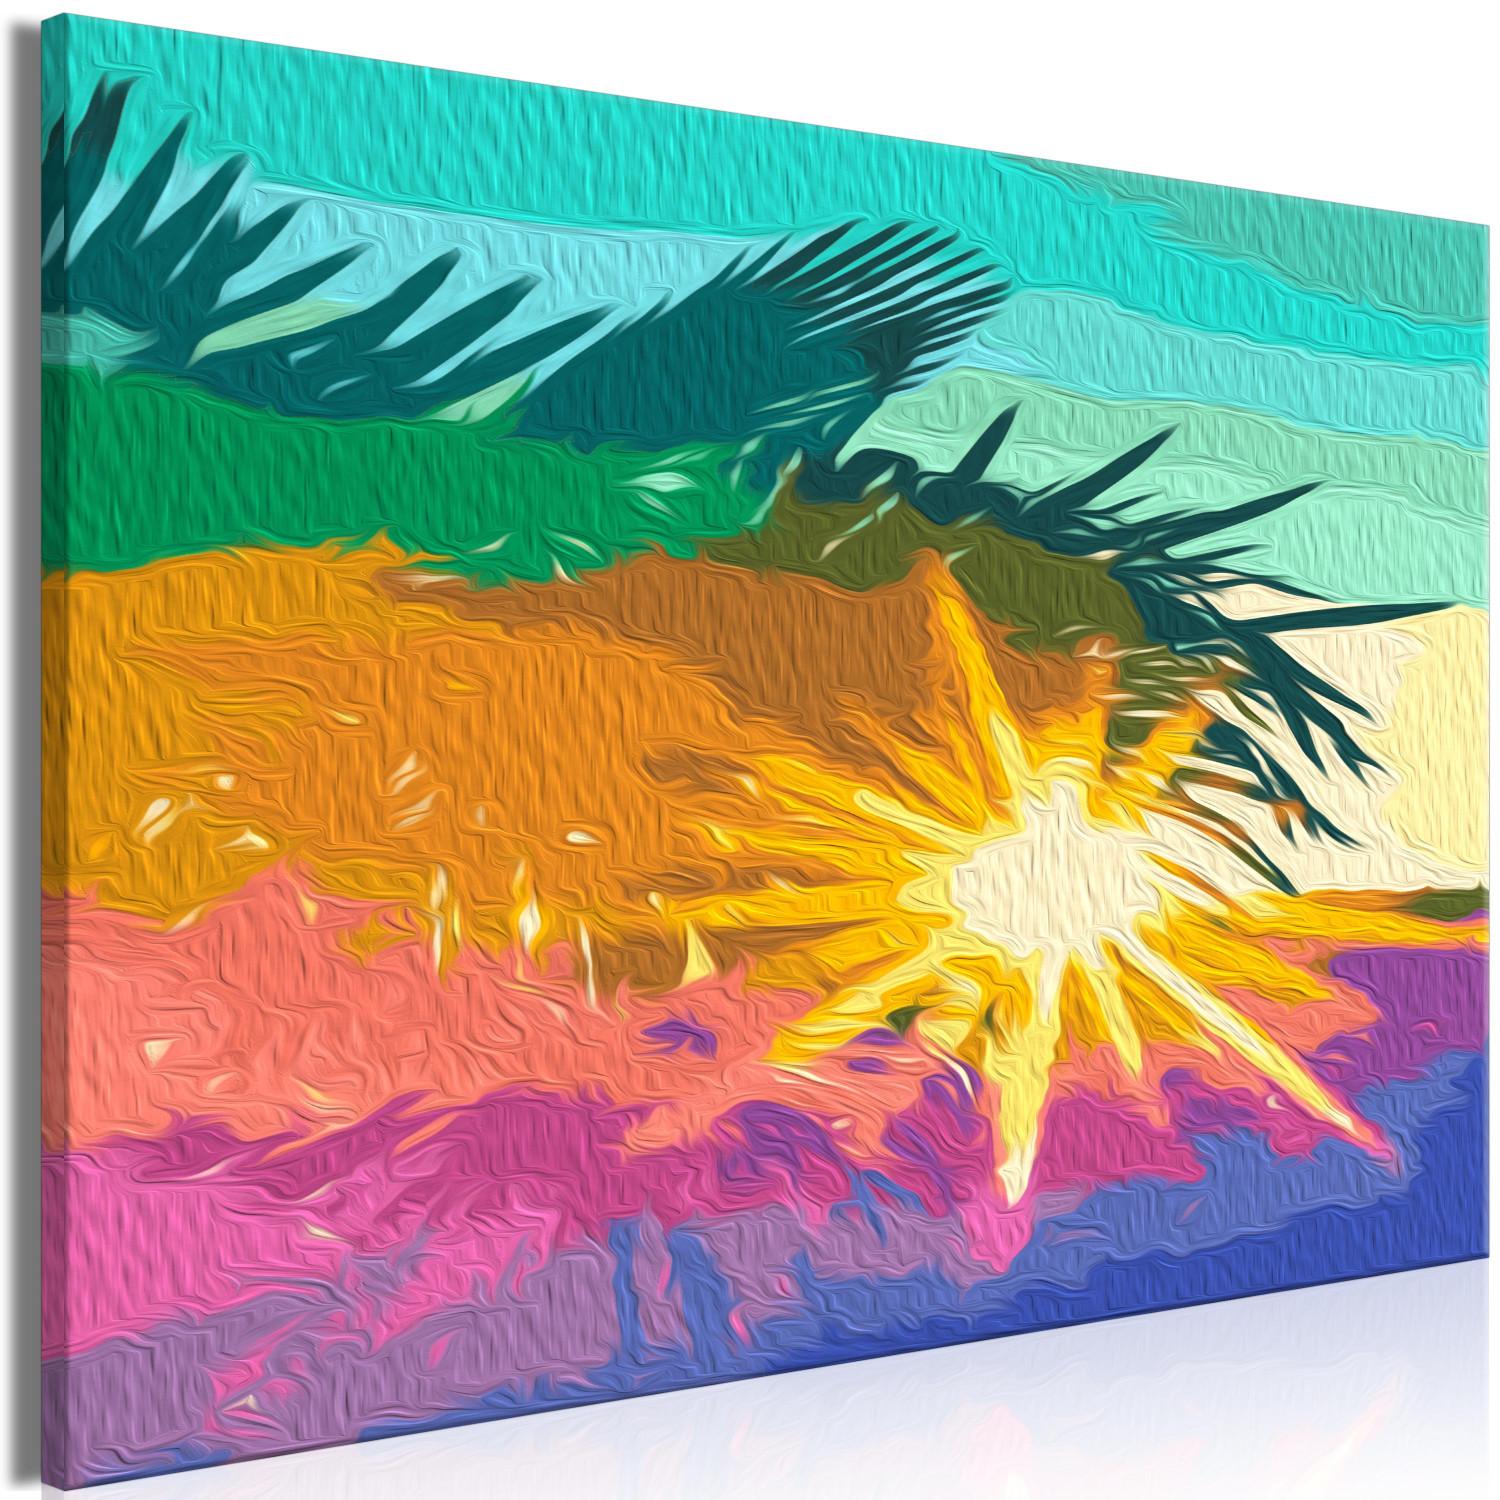 Paint by Number Kit Sunny Morning - Palm Trees Illuminated With Cheerful Colors